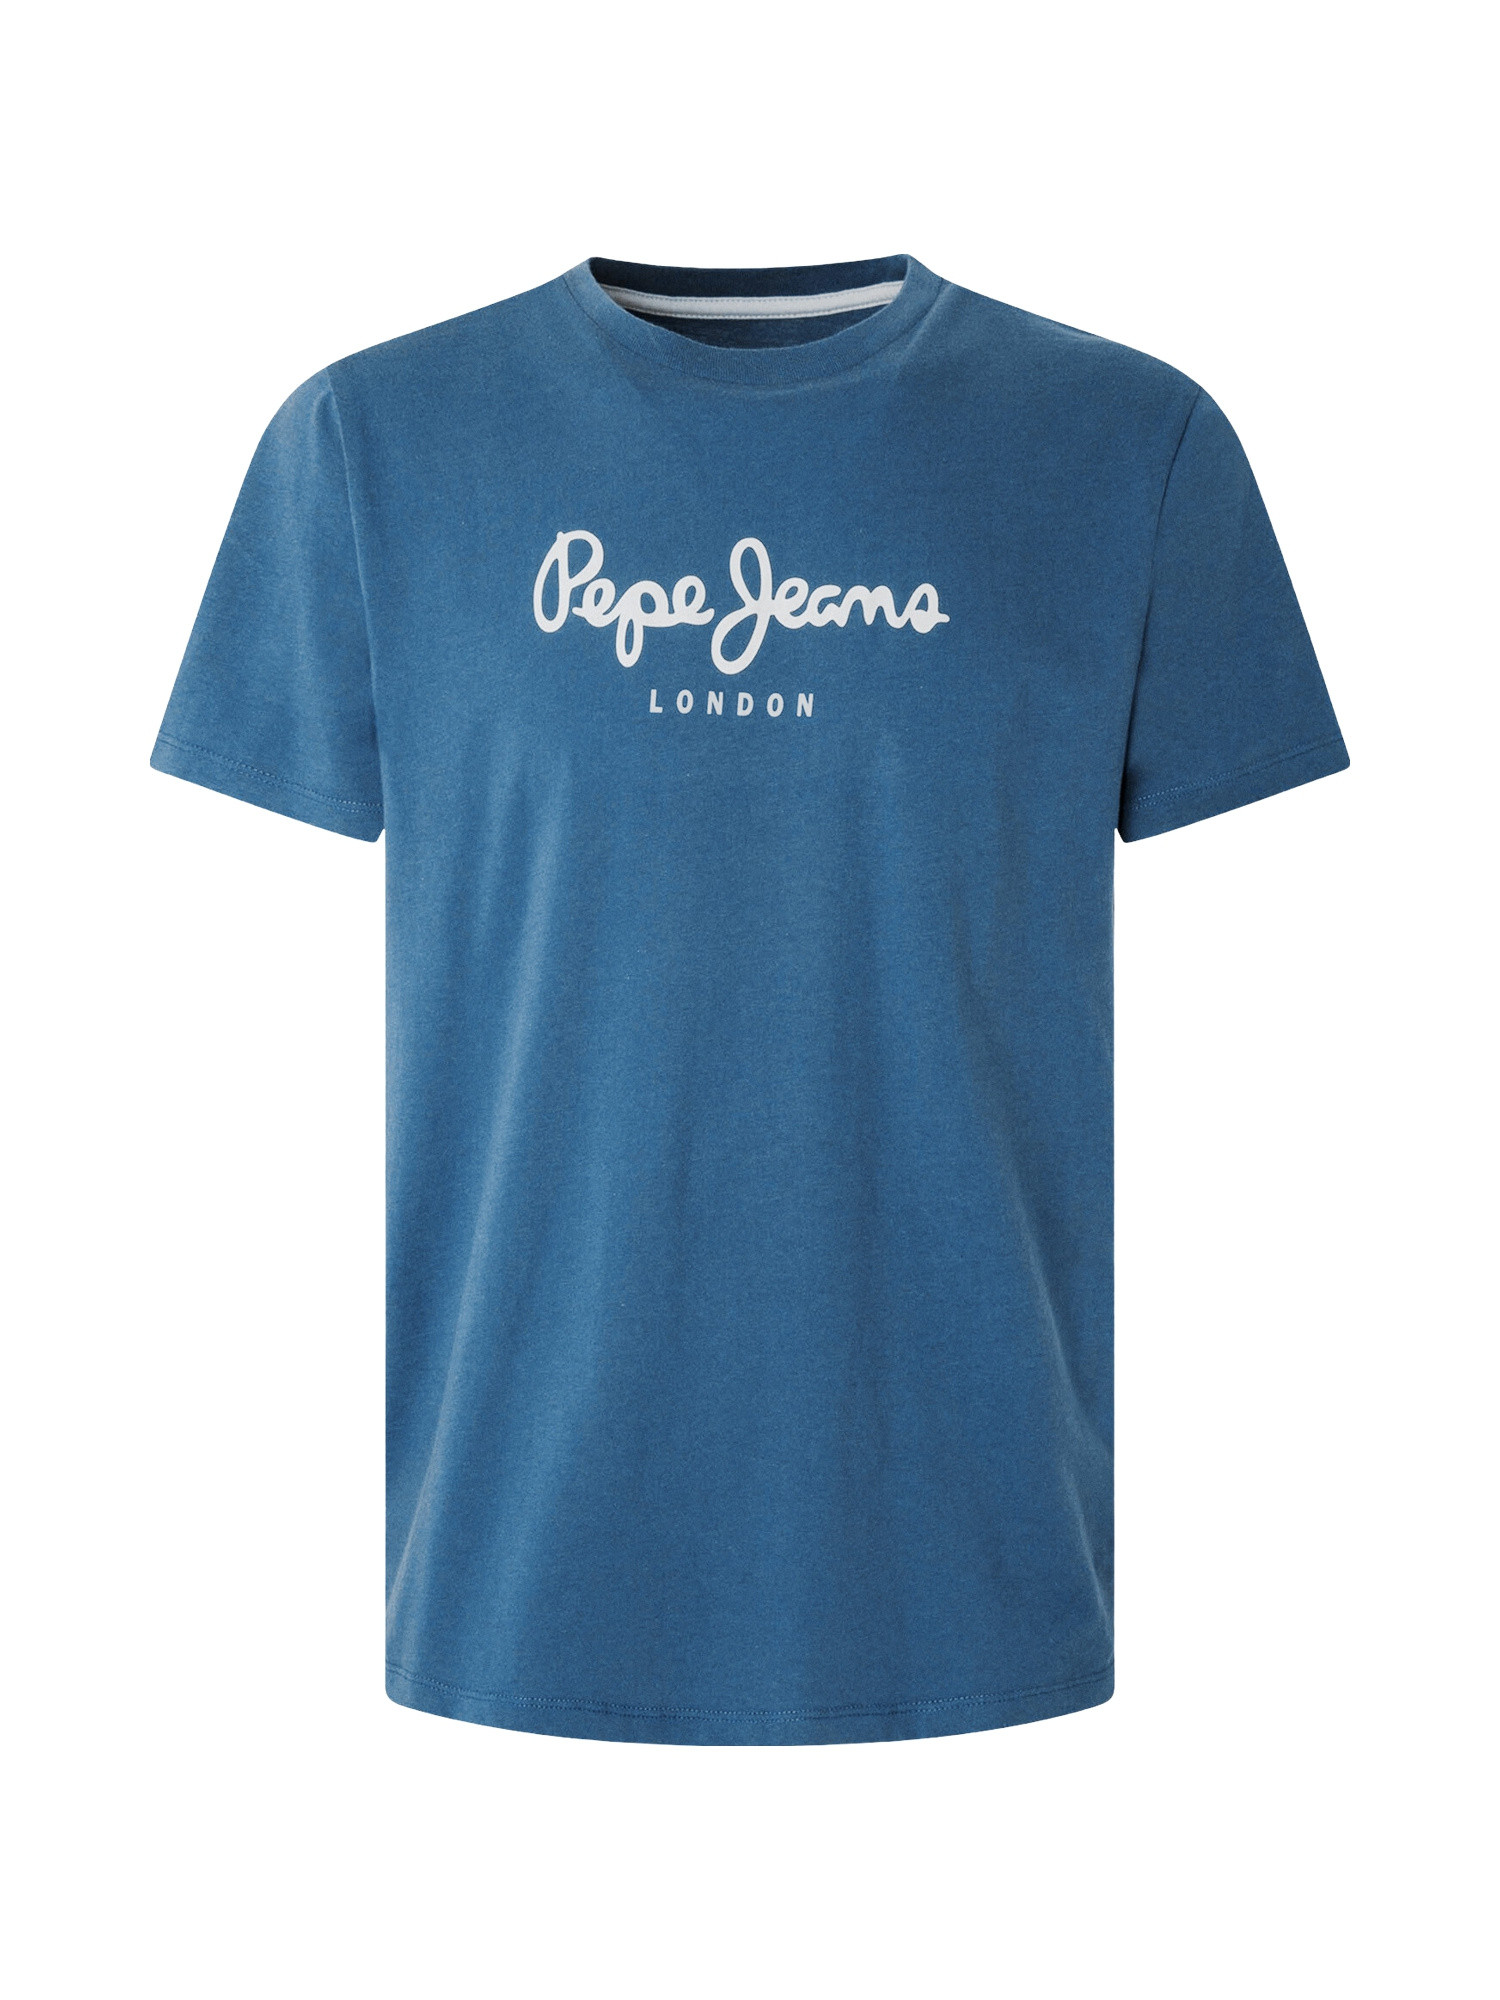 Pepe Jeans - T-shirt con logo in cotone, Blu, large